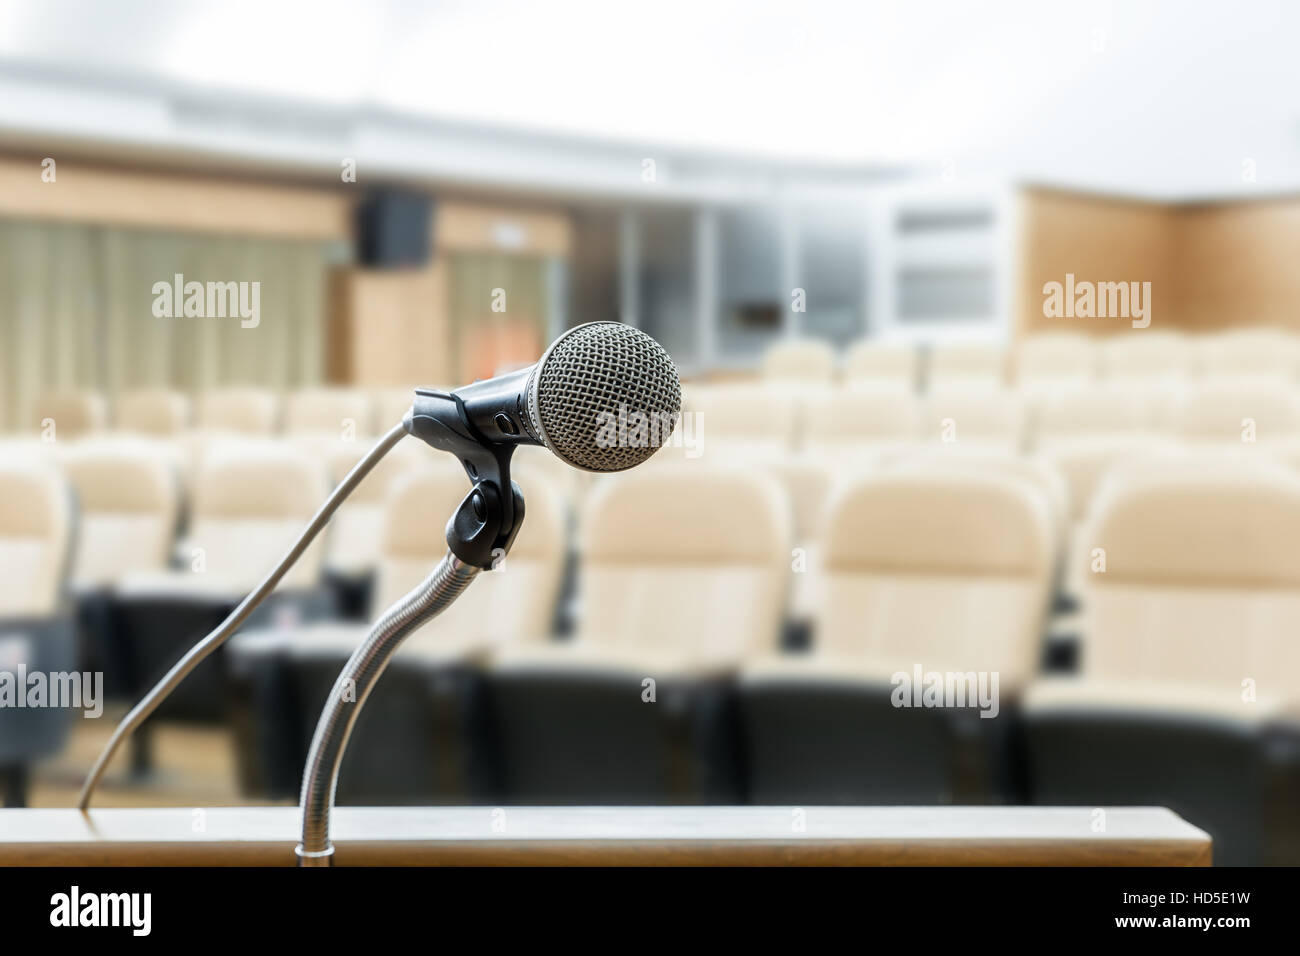 Microphone stand on podium with abstract blur photo of conference hall or seminar room in background. Business seminar concept. Stock Photo